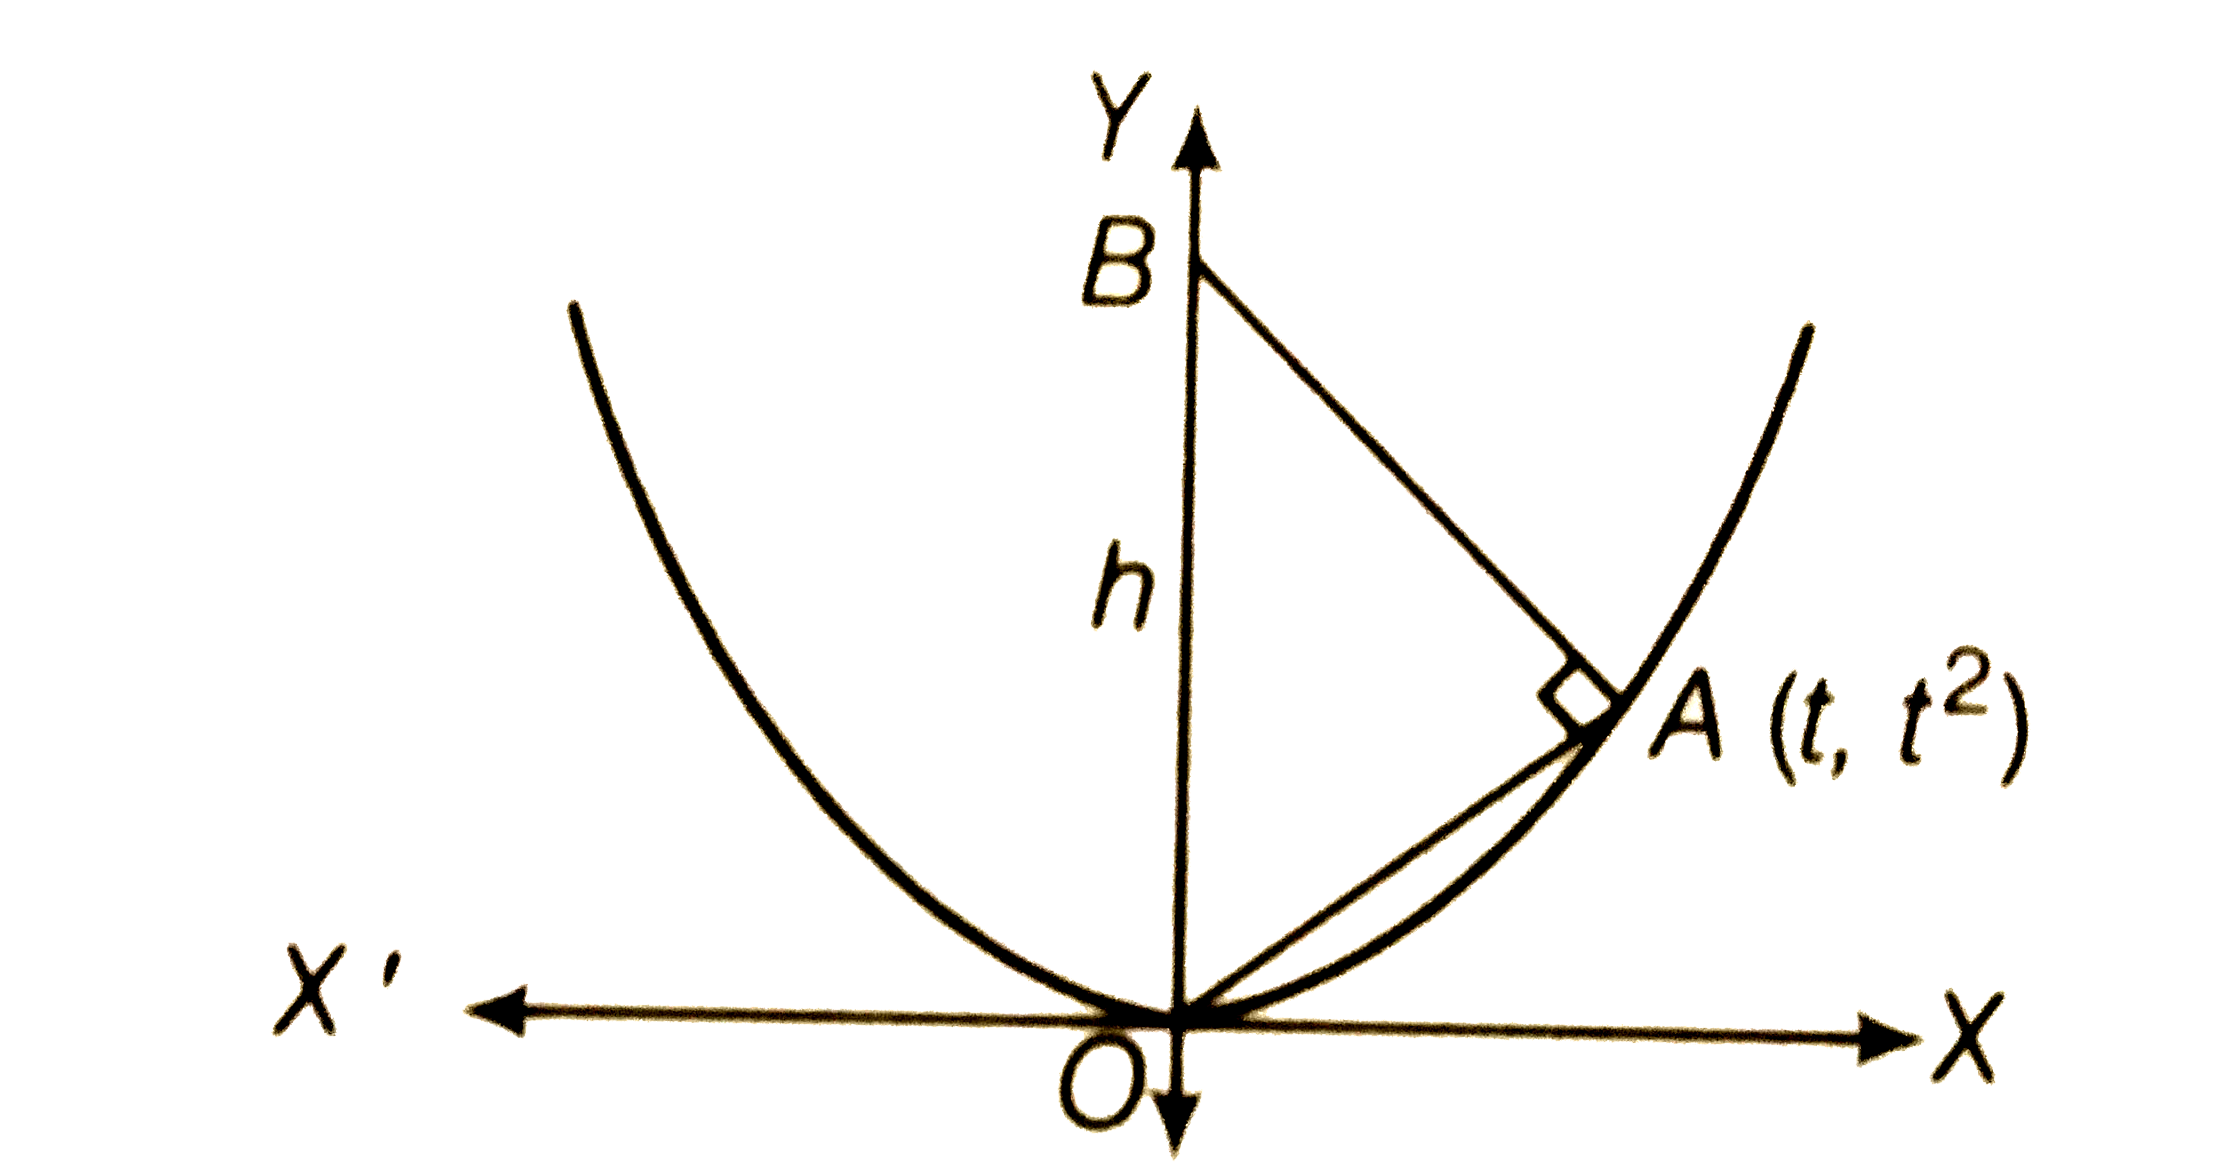 The figure shows a right triangle with its hypotenuse OB along the y-axis and its vertex A on the parabola y=x^(2).      Let h represents the length of the hypotenuse which depends on the x-coordinate of the point A. The value of lim(t to o (h) is equal to